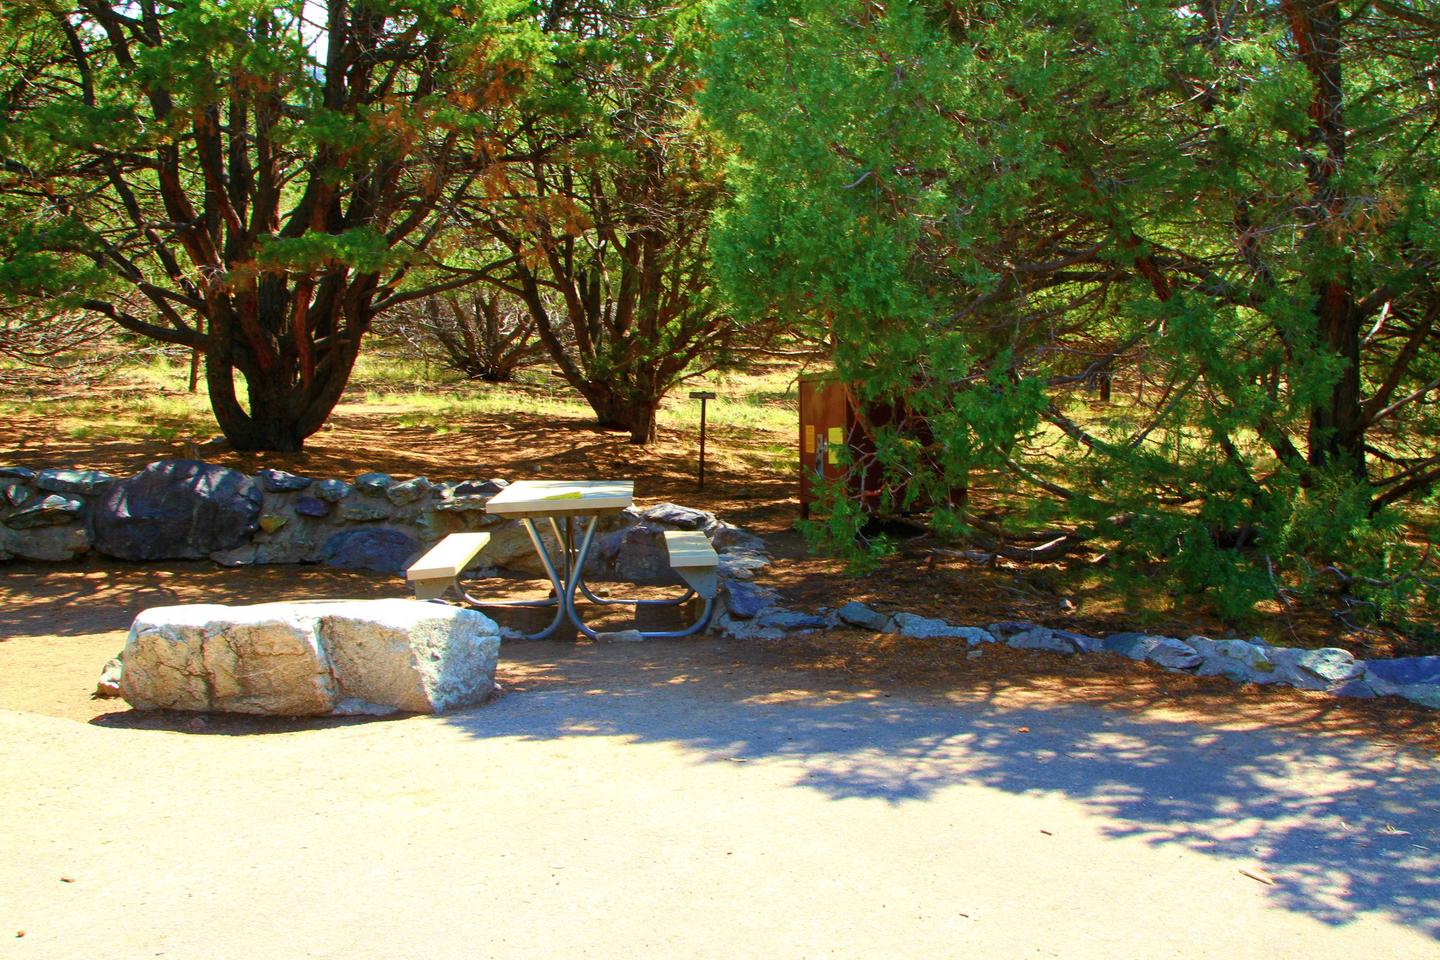 Closer view of Site #51 tent site, picnic table, and bear box. Medium boulder acts as a boundary between the parking pad and the tent area. Site #51, Pinon Flats Campground